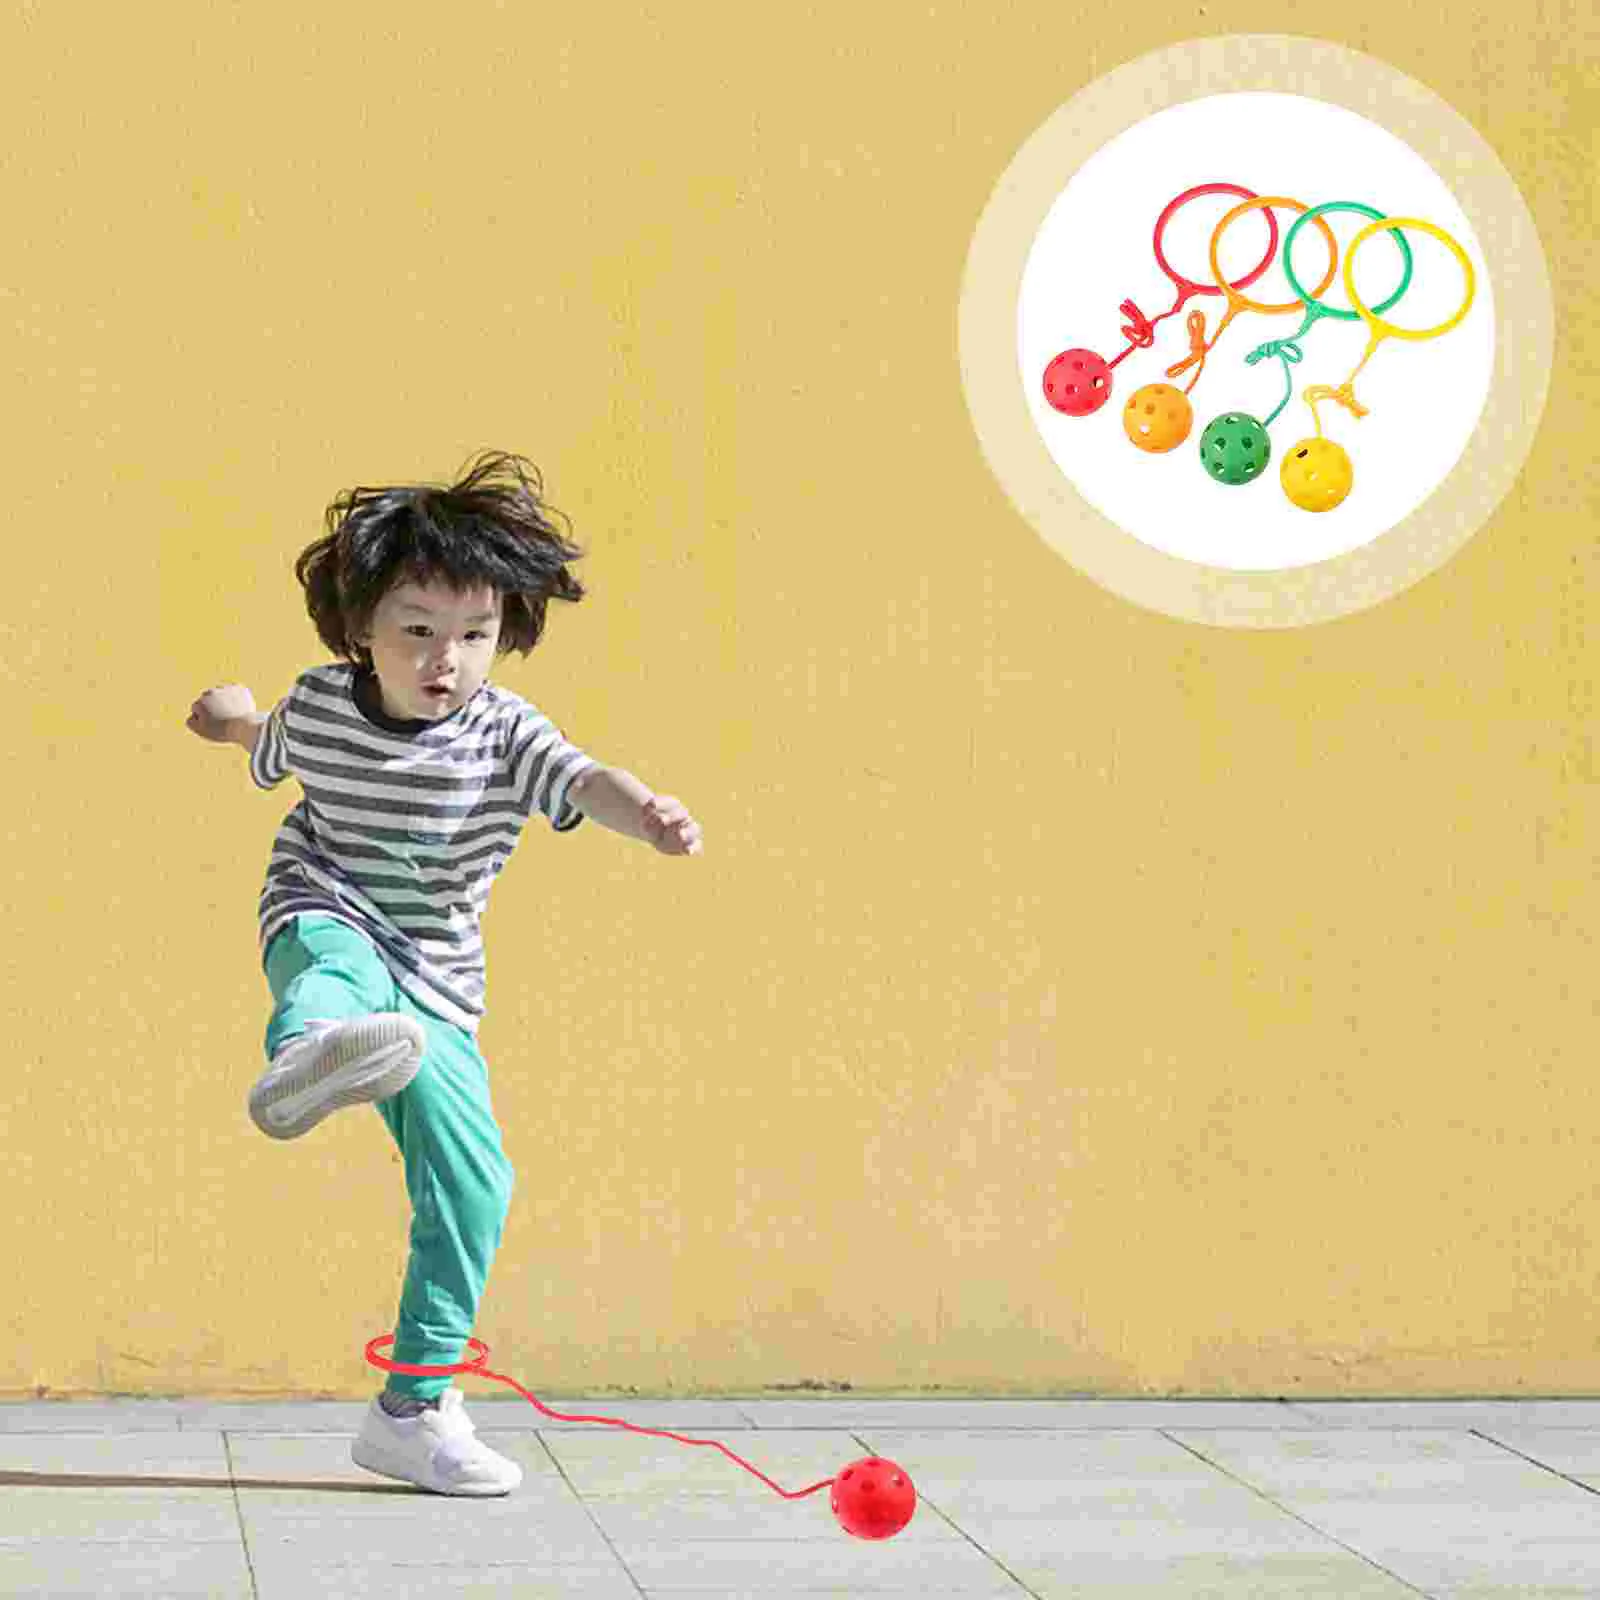 4 Pcs Bouncing Ball Toy Children Toys Kids Jumping Fun Games for Ankle Skipping Leg Balls Plastic Fitness Equipment playing ball toy patting for children bouncing home silent basketball kids jumping bouncy balls toys